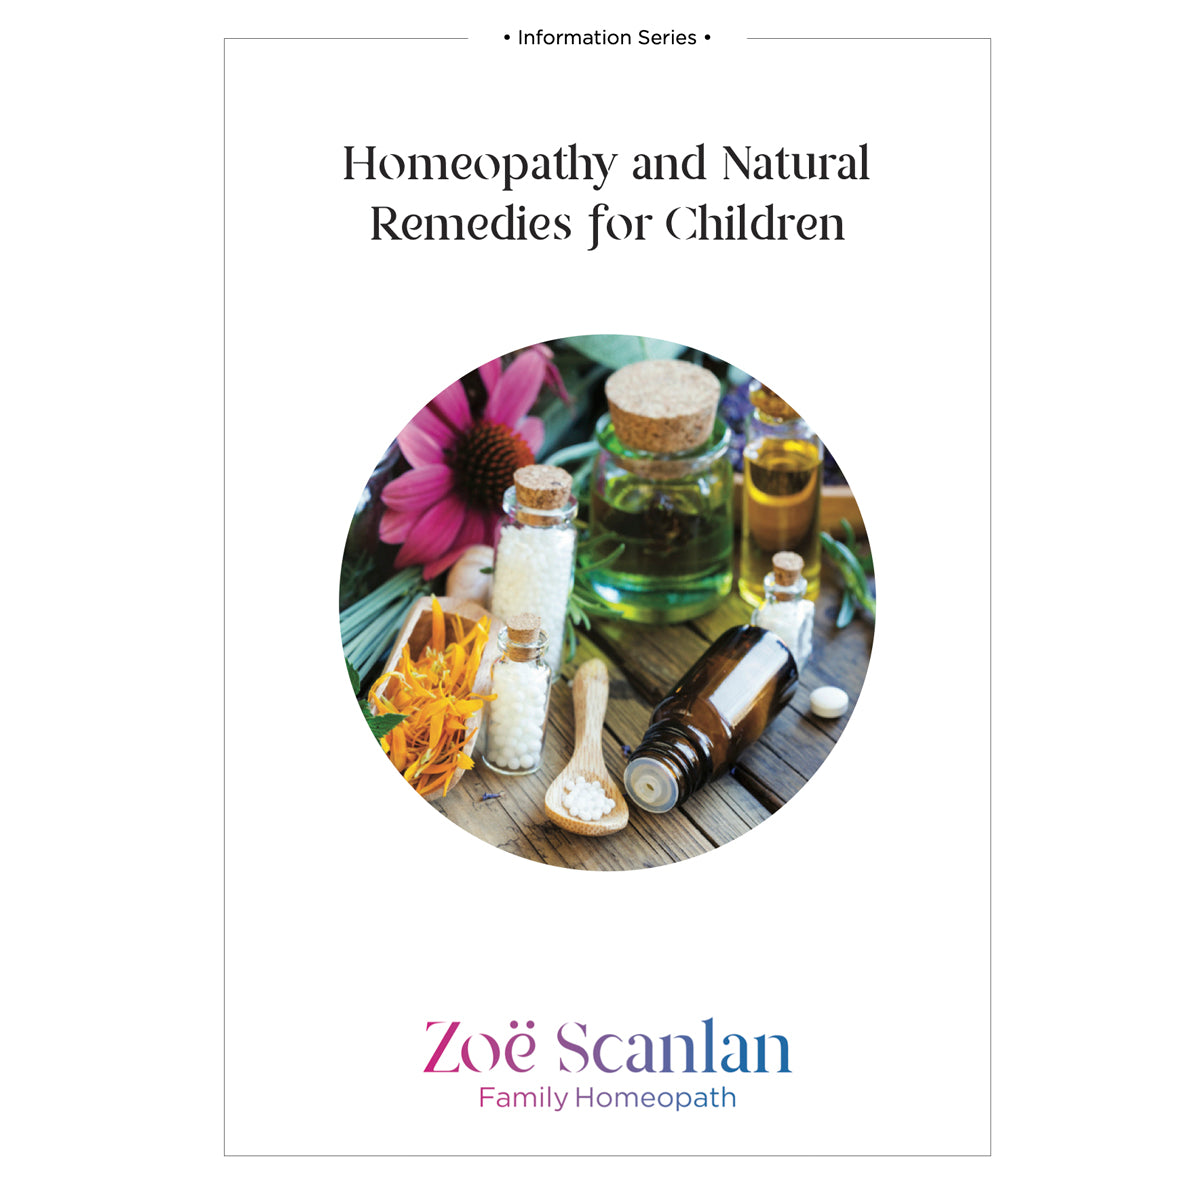 Homeopathy & Natural Remedies for Children by Zoe Scanlan